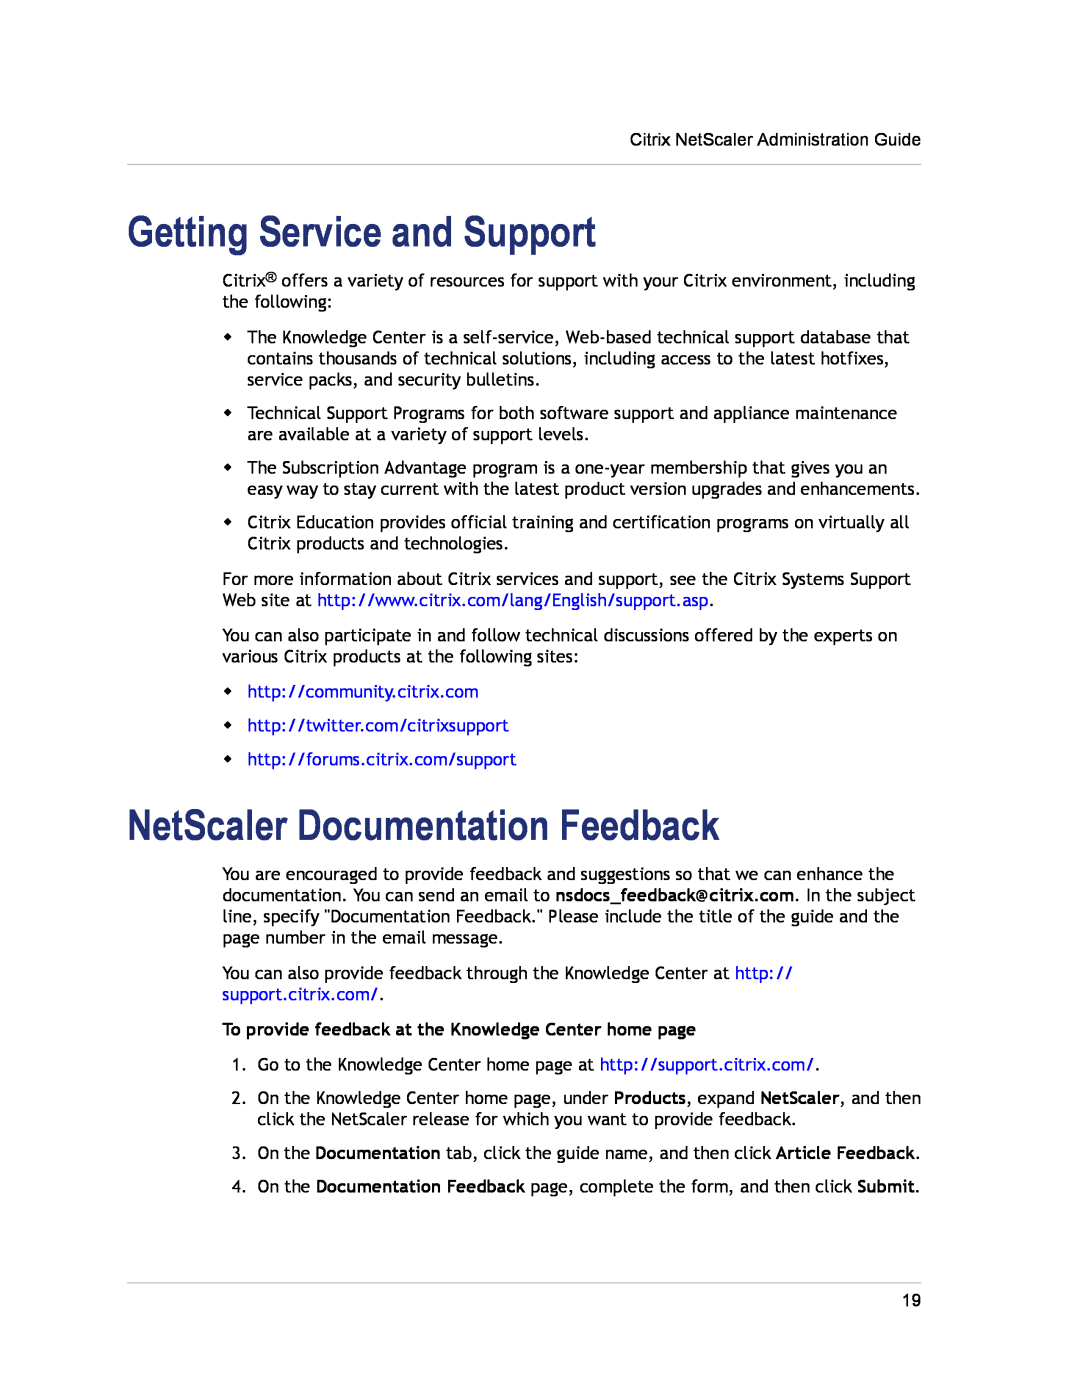 Citrix Systems CITRIX NETSCALER 9.3 manual Getting Service and Support, NetScaler Documentation Feedback 